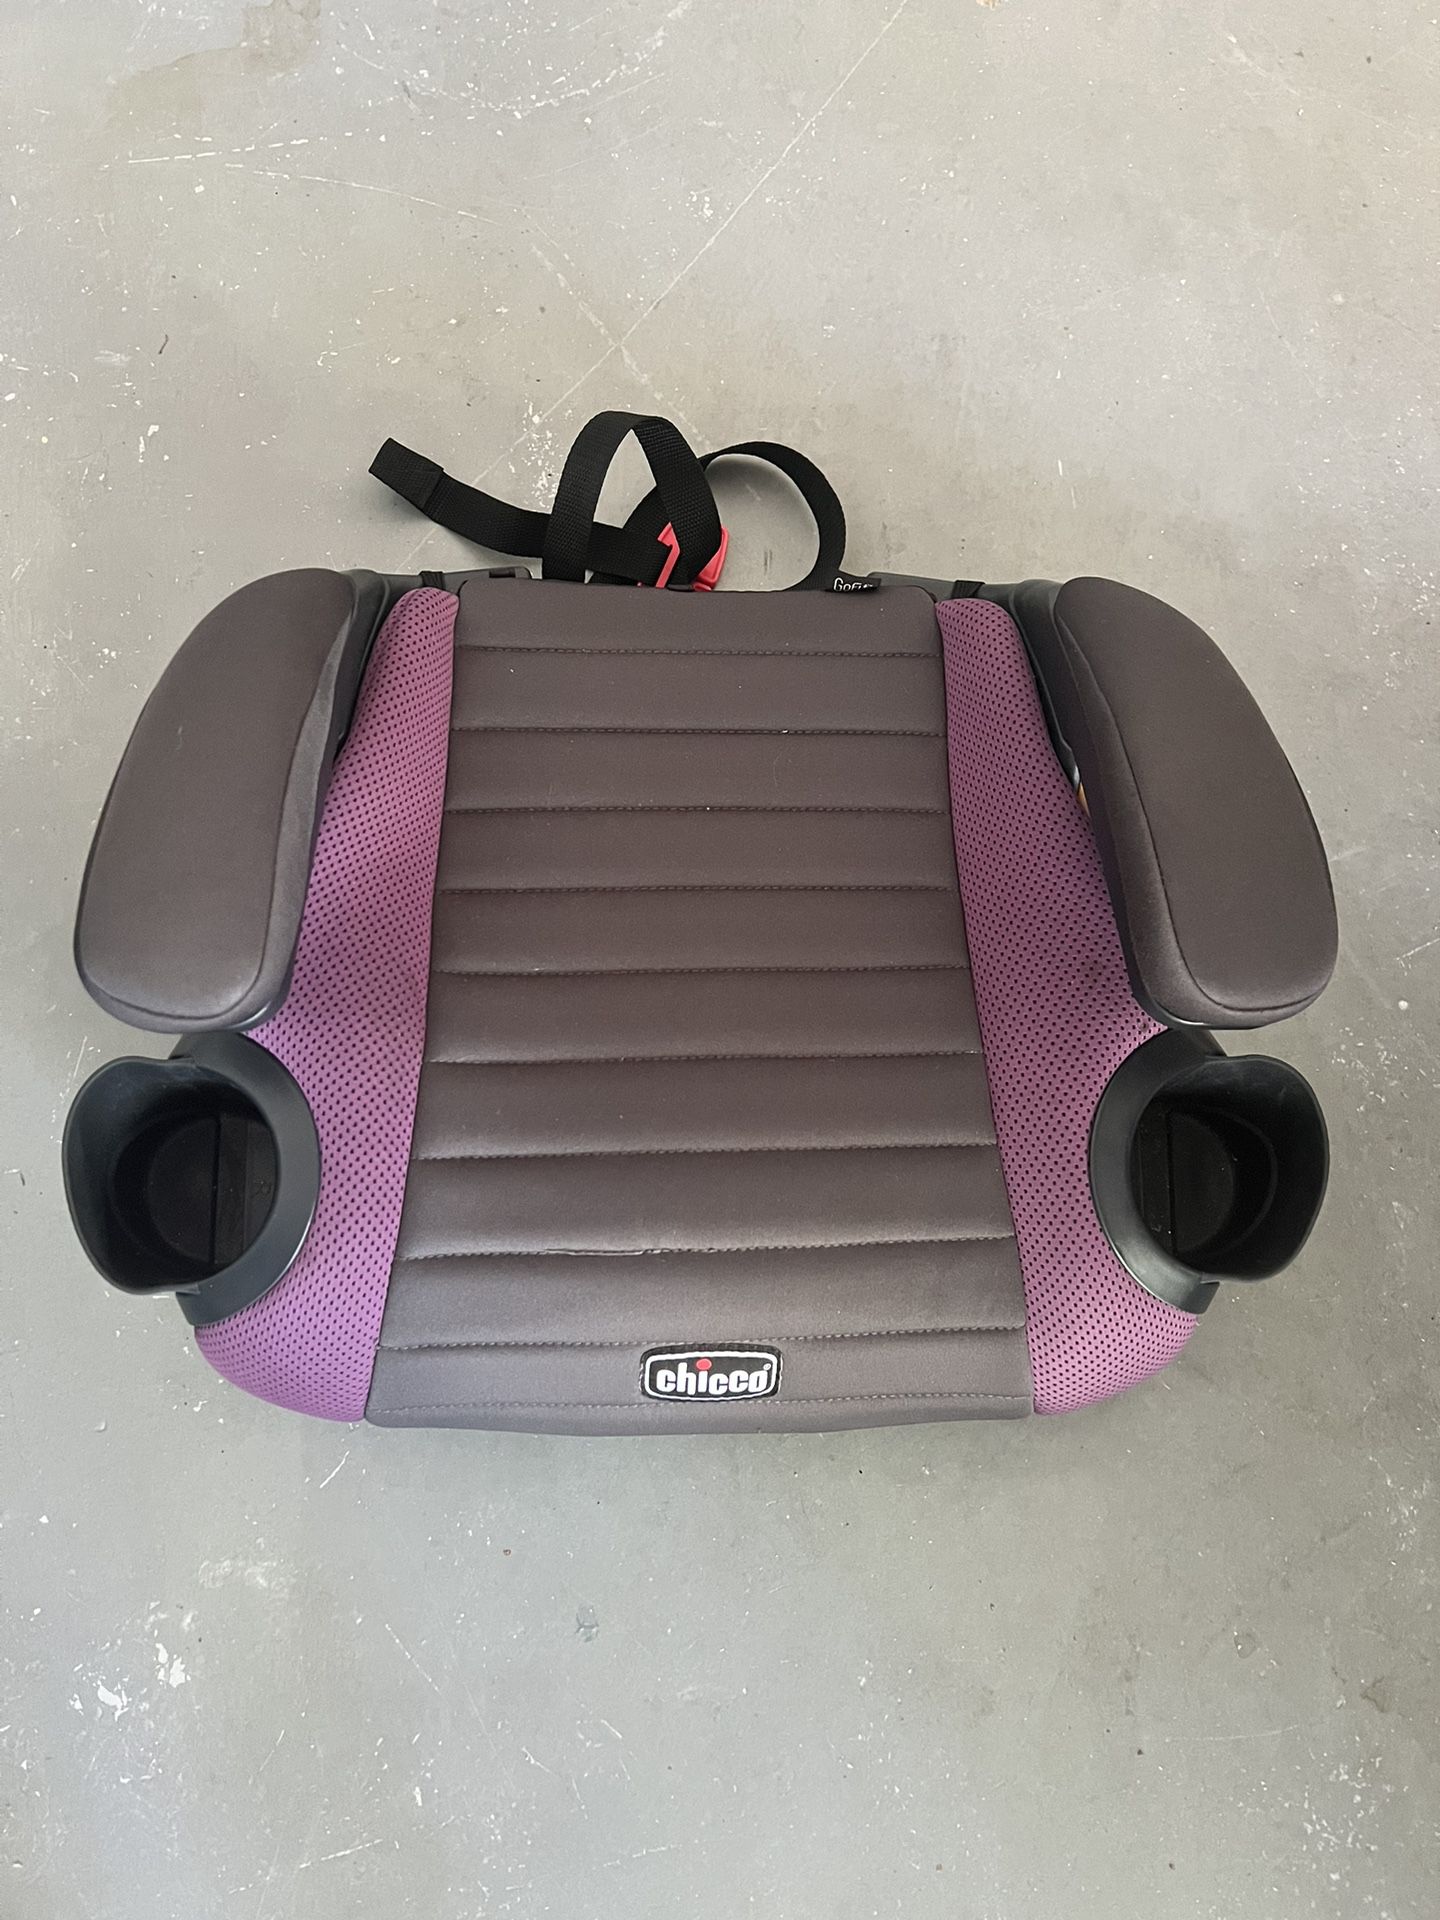 Chicco Booster seat